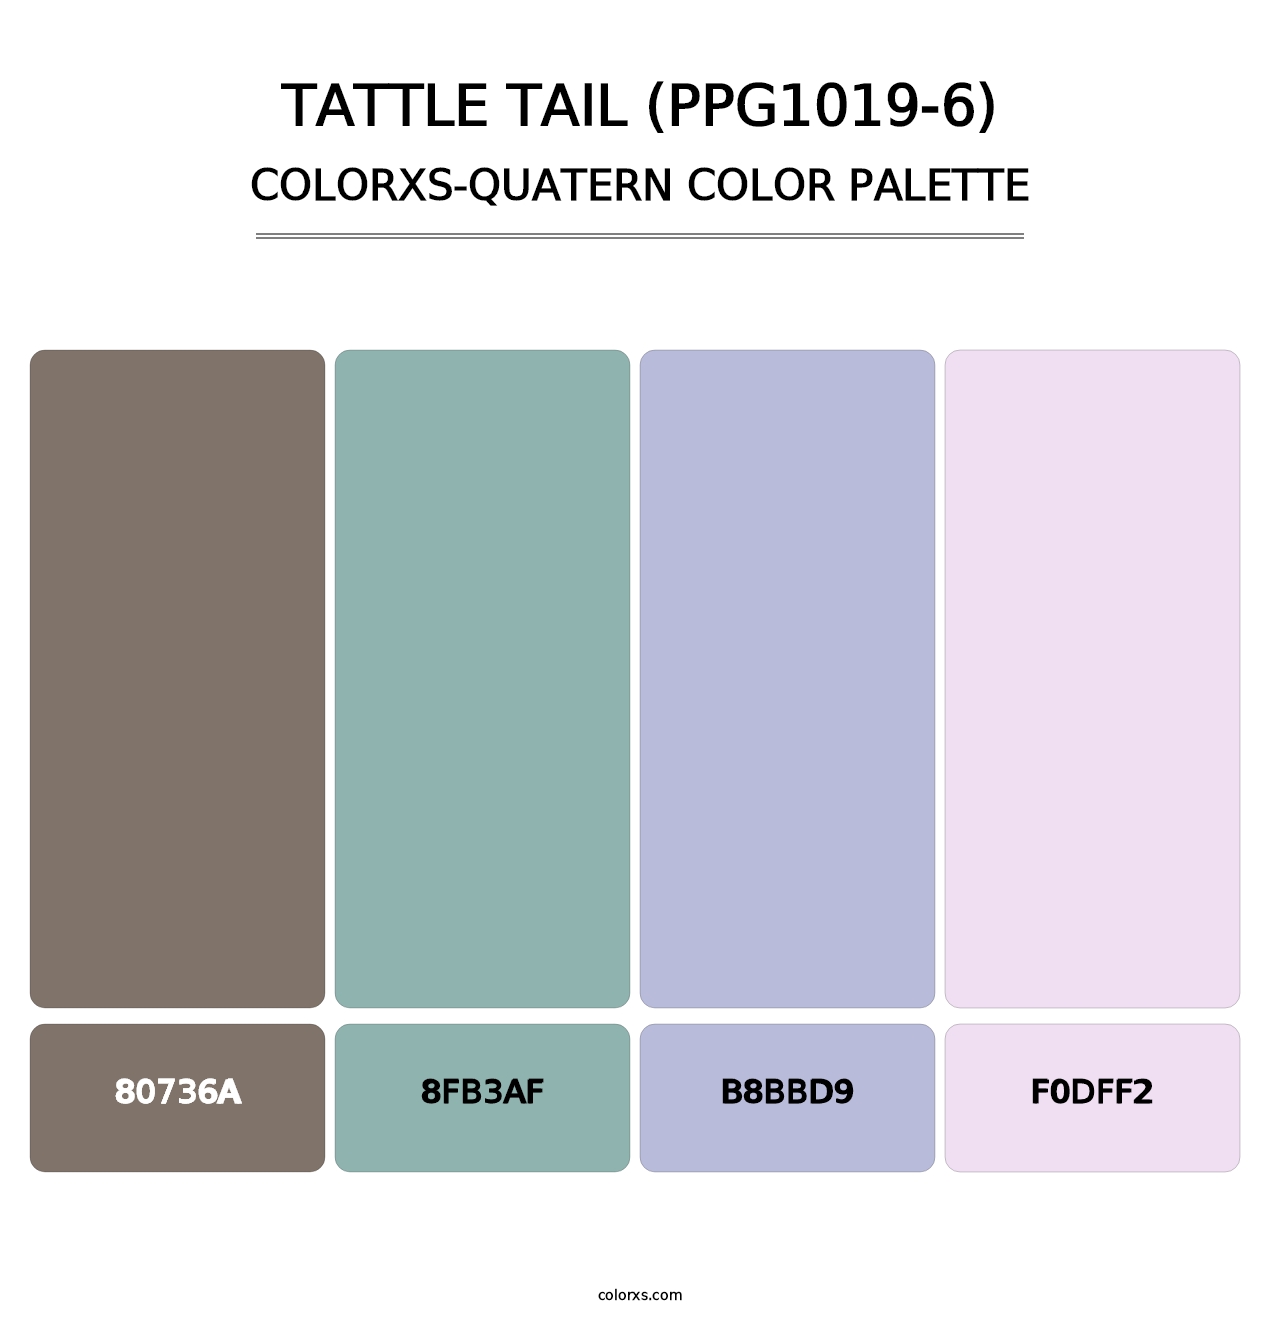 Tattle Tail (PPG1019-6) - Colorxs Quatern Palette